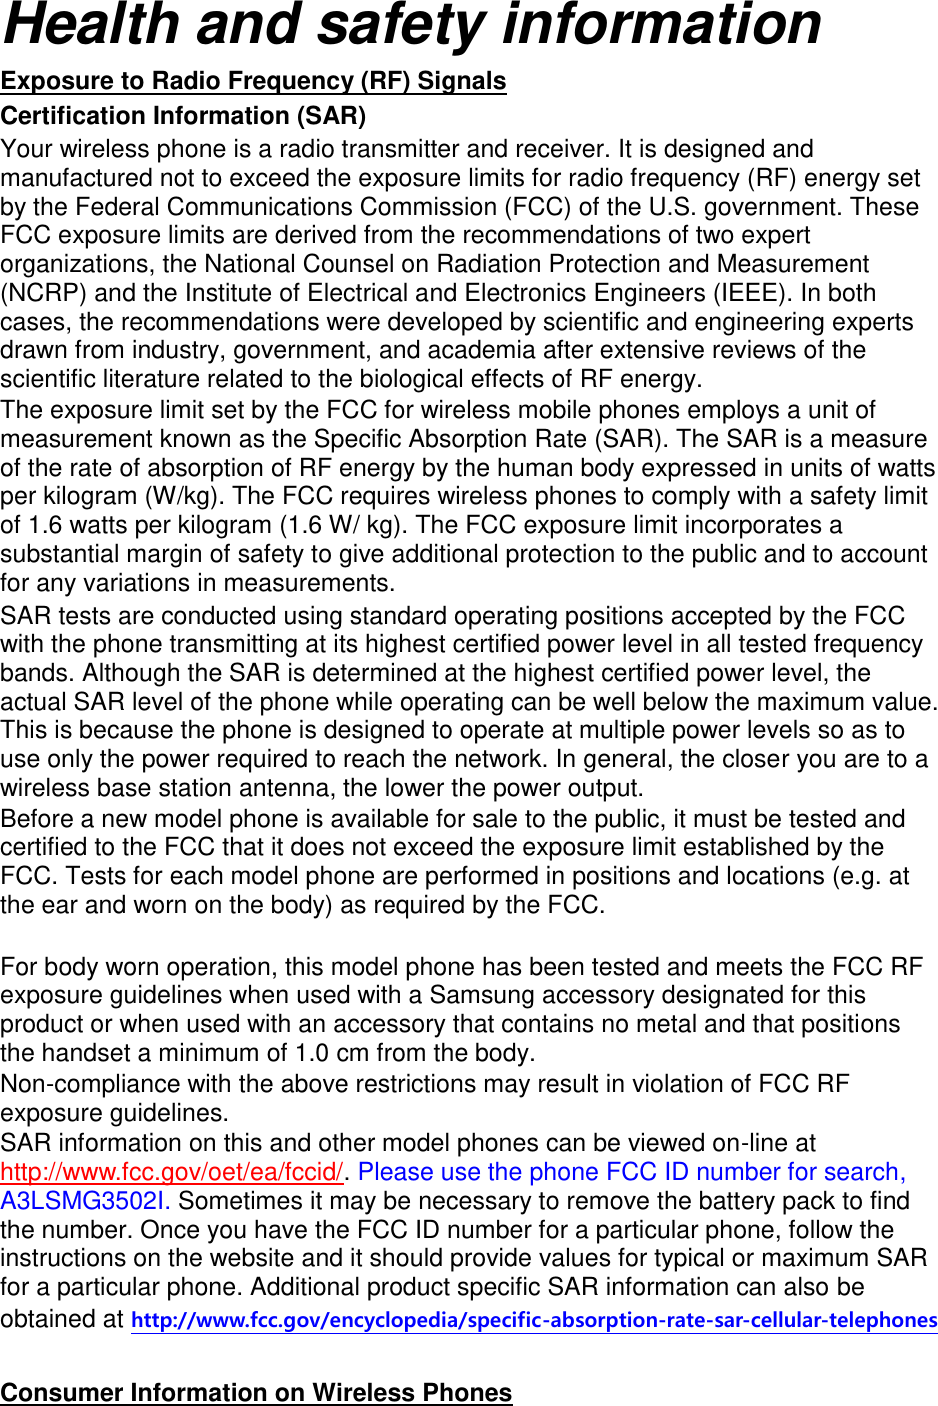 Health and safety information Exposure to Radio Frequency (RF) Signals Certification Information (SAR) Your wireless phone is a radio transmitter and receiver. It is designed and manufactured not to exceed the exposure limits for radio frequency (RF) energy set by the Federal Communications Commission (FCC) of the U.S. government. These FCC exposure limits are derived from the recommendations of two expert organizations, the National Counsel on Radiation Protection and Measurement (NCRP) and the Institute of Electrical and Electronics Engineers (IEEE). In both cases, the recommendations were developed by scientific and engineering experts drawn from industry, government, and academia after extensive reviews of the scientific literature related to the biological effects of RF energy. The exposure limit set by the FCC for wireless mobile phones employs a unit of measurement known as the Specific Absorption Rate (SAR). The SAR is a measure of the rate of absorption of RF energy by the human body expressed in units of watts per kilogram (W/kg). The FCC requires wireless phones to comply with a safety limit of 1.6 watts per kilogram (1.6 W/ kg). The FCC exposure limit incorporates a substantial margin of safety to give additional protection to the public and to account for any variations in measurements. SAR tests are conducted using standard operating positions accepted by the FCC with the phone transmitting at its highest certified power level in all tested frequency bands. Although the SAR is determined at the highest certified power level, the actual SAR level of the phone while operating can be well below the maximum value. This is because the phone is designed to operate at multiple power levels so as to use only the power required to reach the network. In general, the closer you are to a wireless base station antenna, the lower the power output. Before a new model phone is available for sale to the public, it must be tested and certified to the FCC that it does not exceed the exposure limit established by the FCC. Tests for each model phone are performed in positions and locations (e.g. at the ear and worn on the body) as required by the FCC.      For body worn operation, this model phone has been tested and meets the FCC RF exposure guidelines when used with a Samsung accessory designated for this product or when used with an accessory that contains no metal and that positions the handset a minimum of 1.0 cm from the body.   Non-compliance with the above restrictions may result in violation of FCC RF exposure guidelines. SAR information on this and other model phones can be viewed on-line at http://www.fcc.gov/oet/ea/fccid/. Please use the phone FCC ID number for search, A3LSMG3502I. Sometimes it may be necessary to remove the battery pack to find the number. Once you have the FCC ID number for a particular phone, follow the instructions on the website and it should provide values for typical or maximum SAR for a particular phone. Additional product specific SAR information can also be obtained at http://www.fcc.gov/encyclopedia/specific-absorption-rate-sar-cellular-telephones  Consumer Information on Wireless Phones 